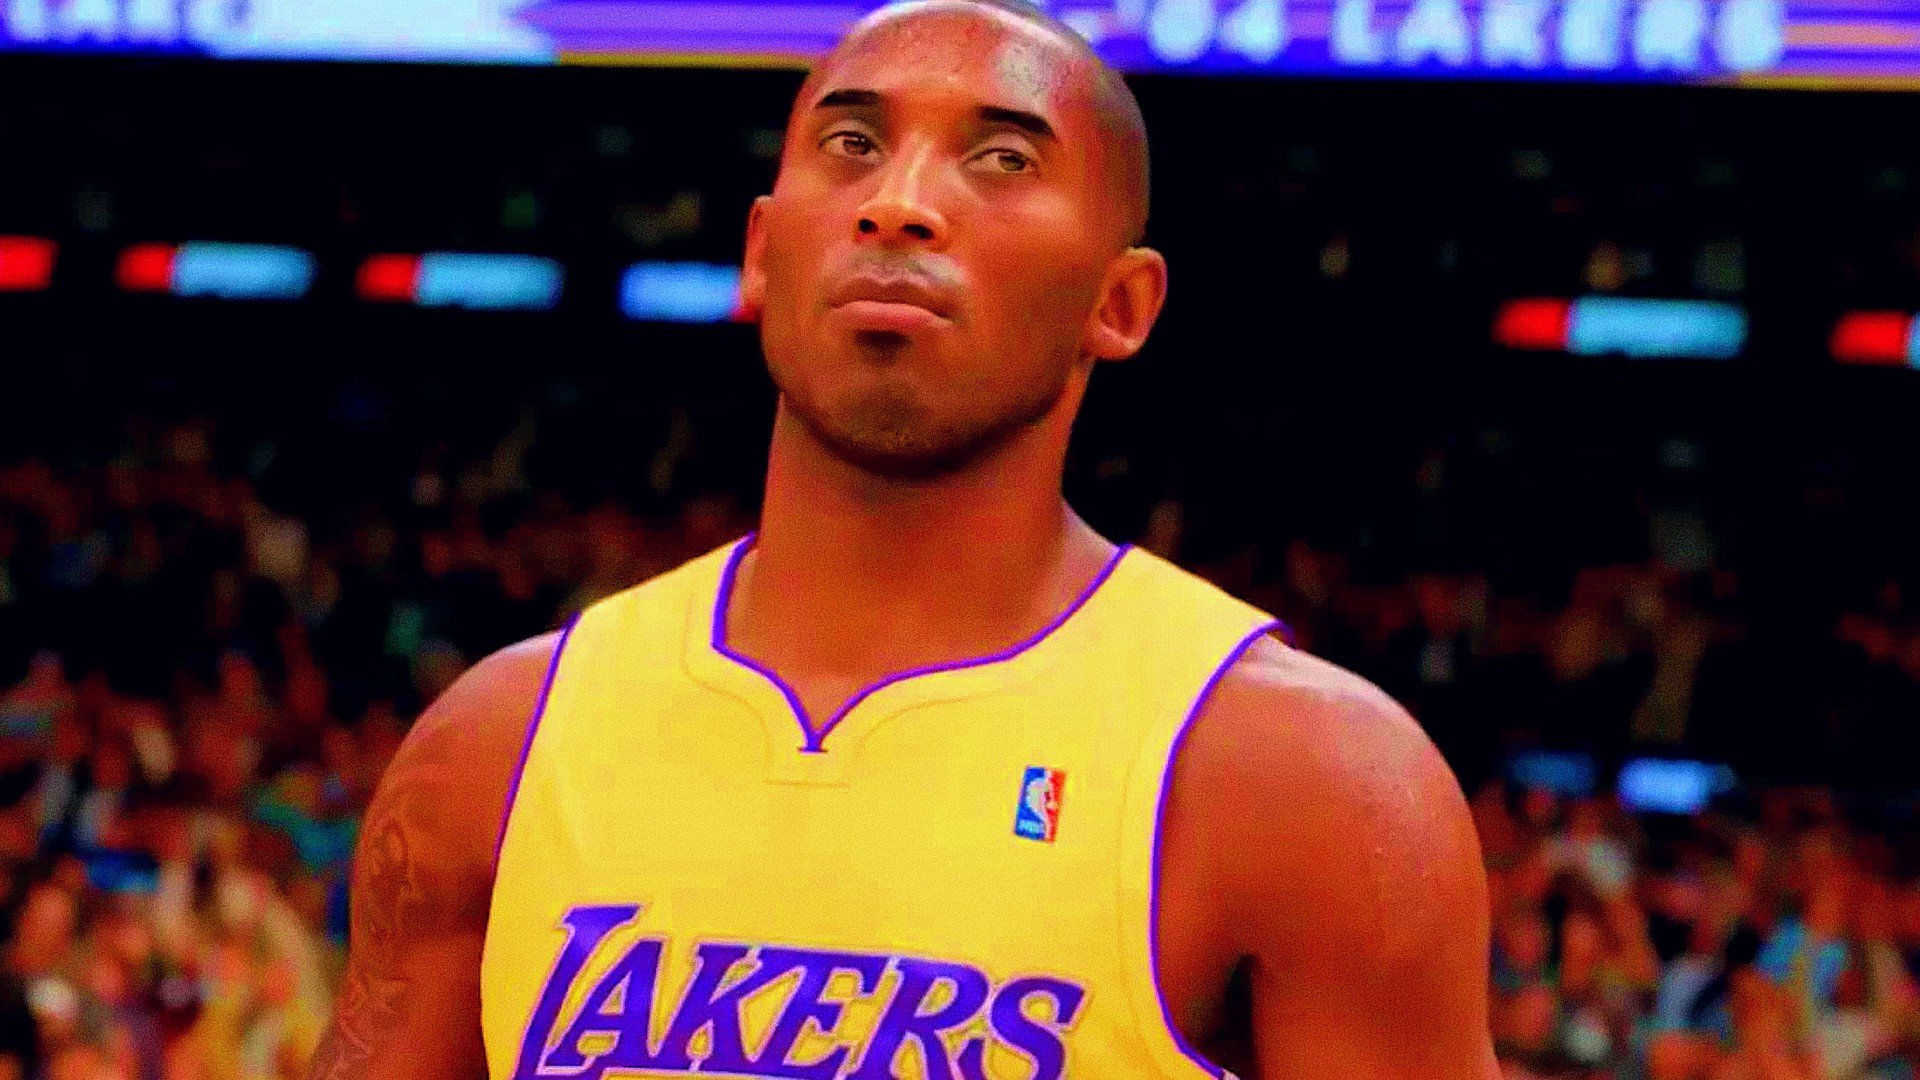 NBA 2K24's cover athlete is both a surprising and obvious choice